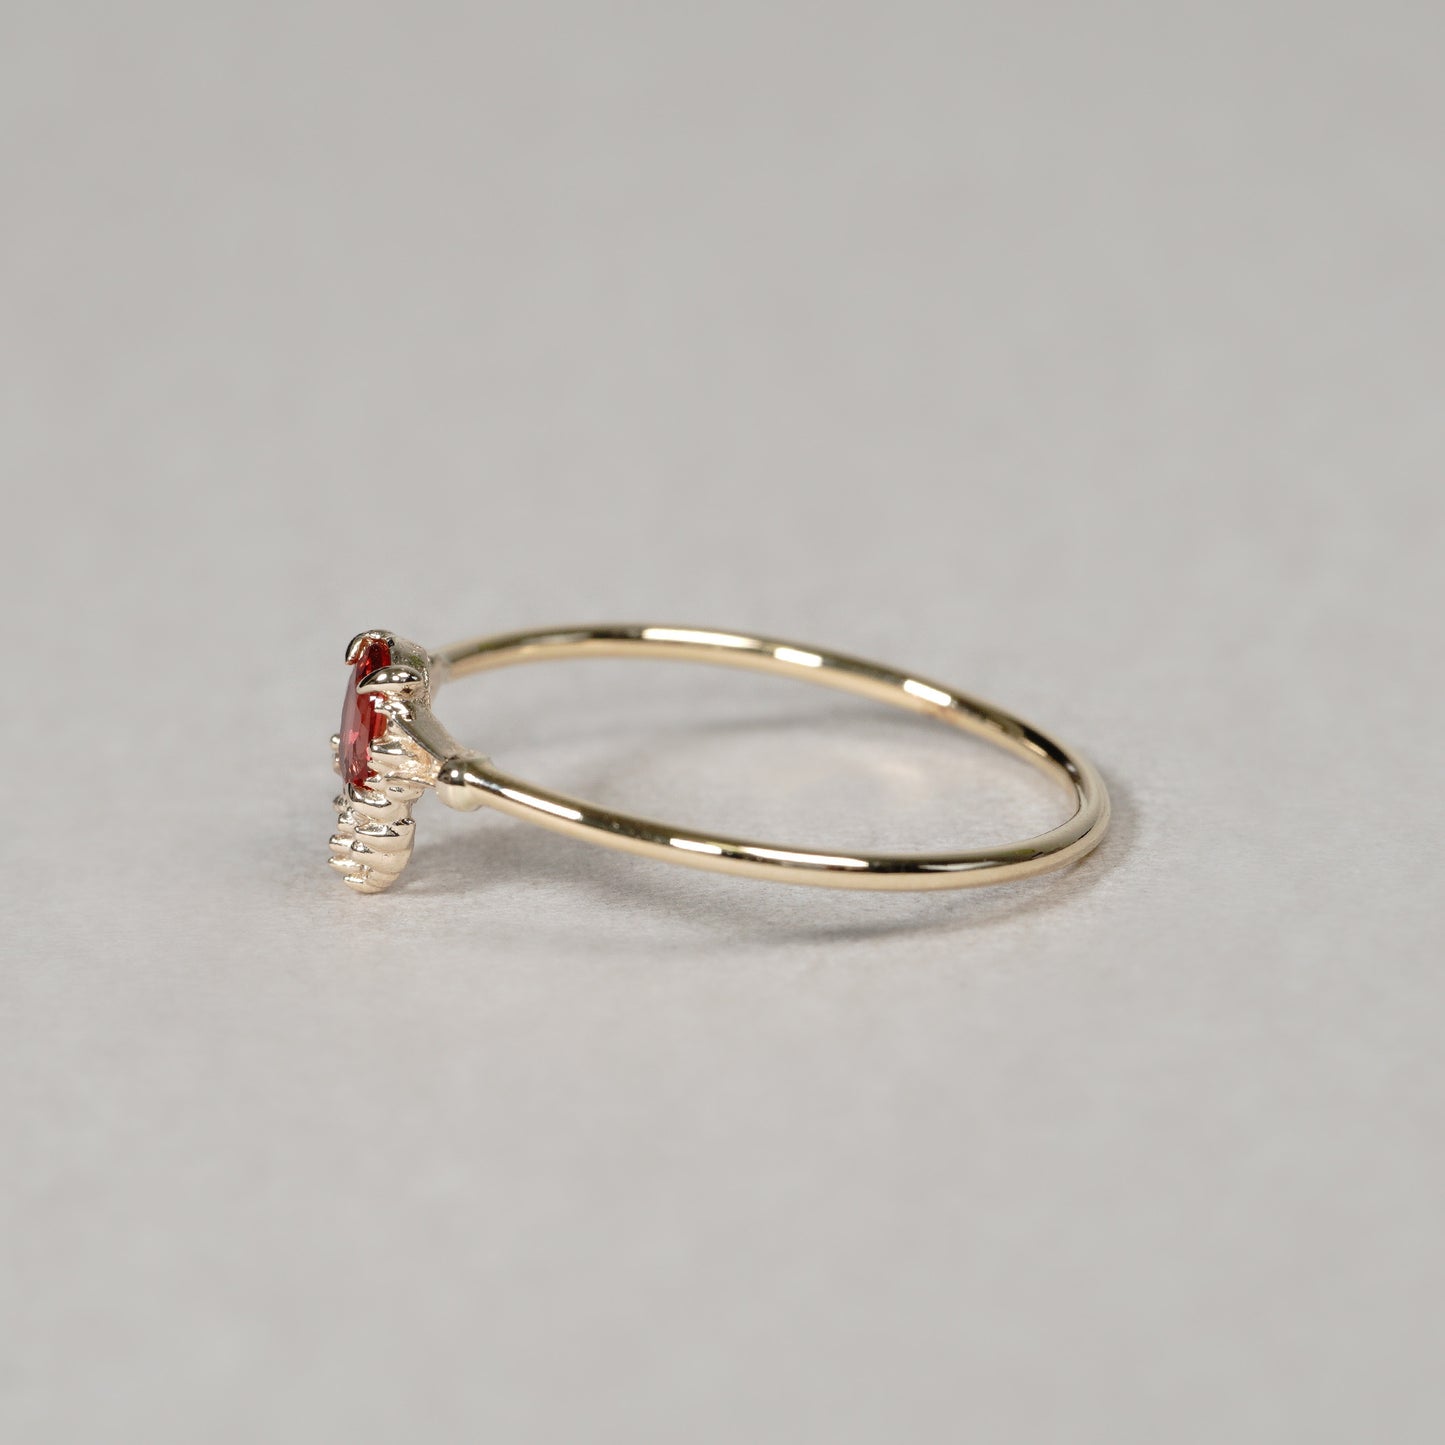 1238 Red sapphire Ring